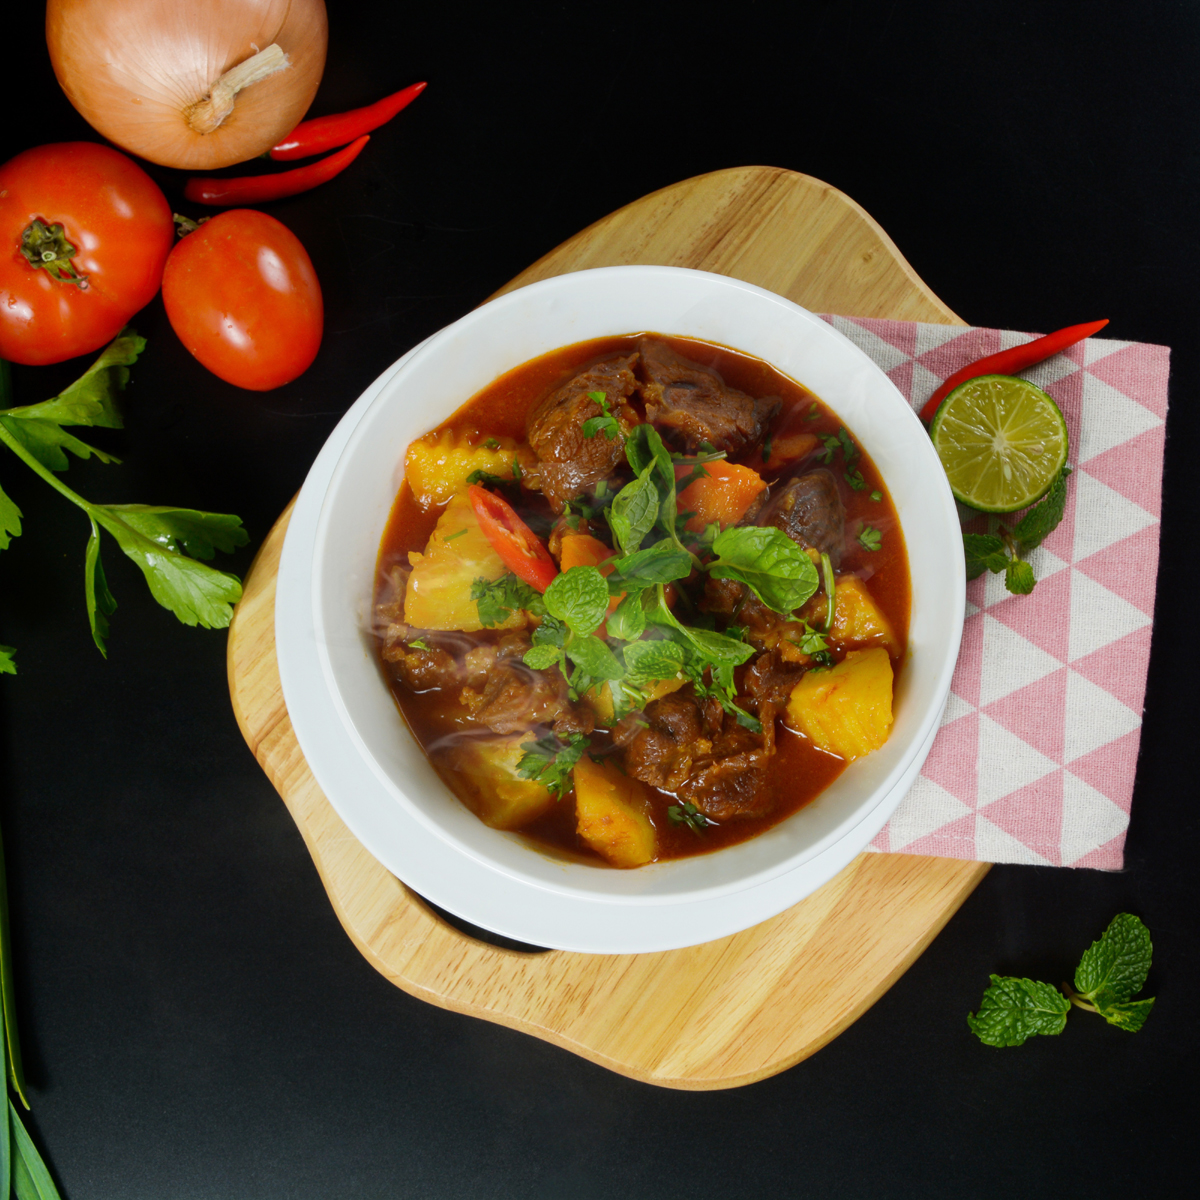 Warming Beef Stew for a Chilly Night: A Slow Cooker Recipe